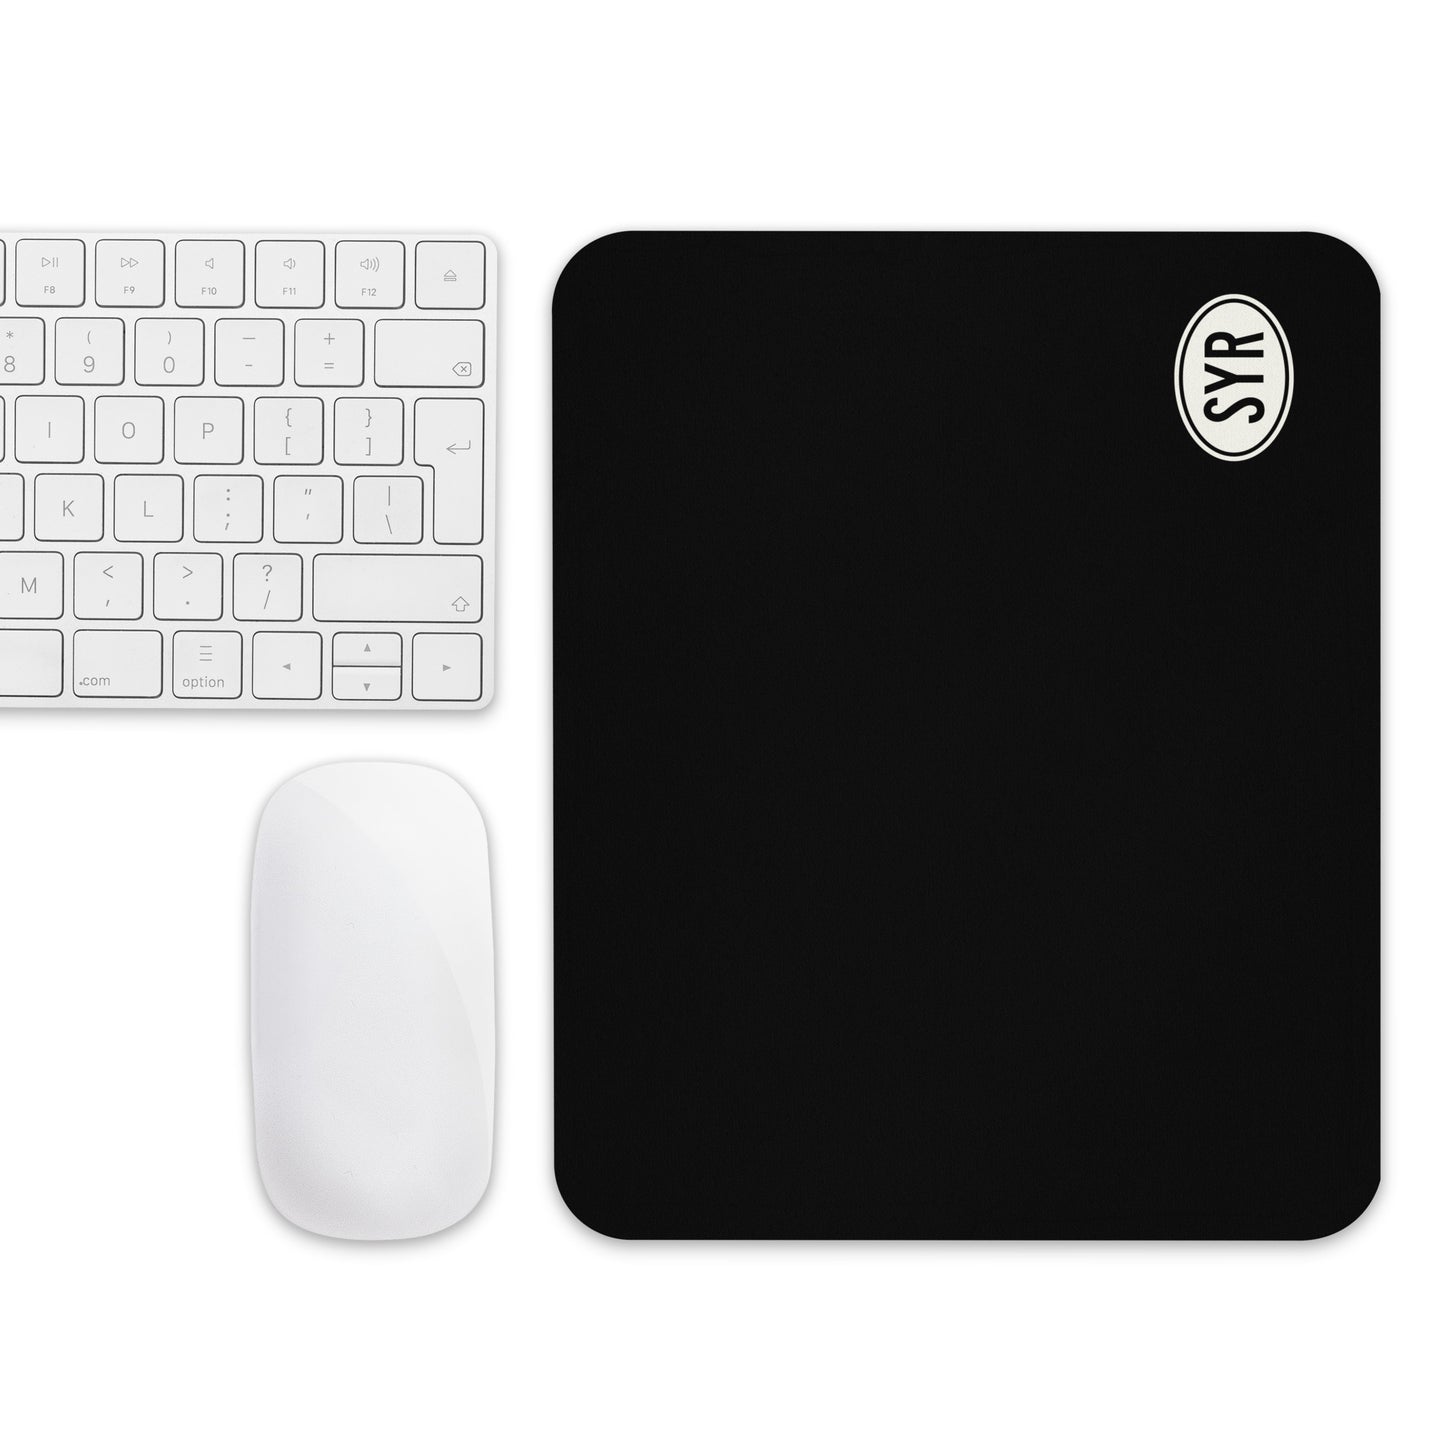 Unique Travel Gift Mouse Pad - White Oval • SYR Syracuse • YHM Designs - Image 04